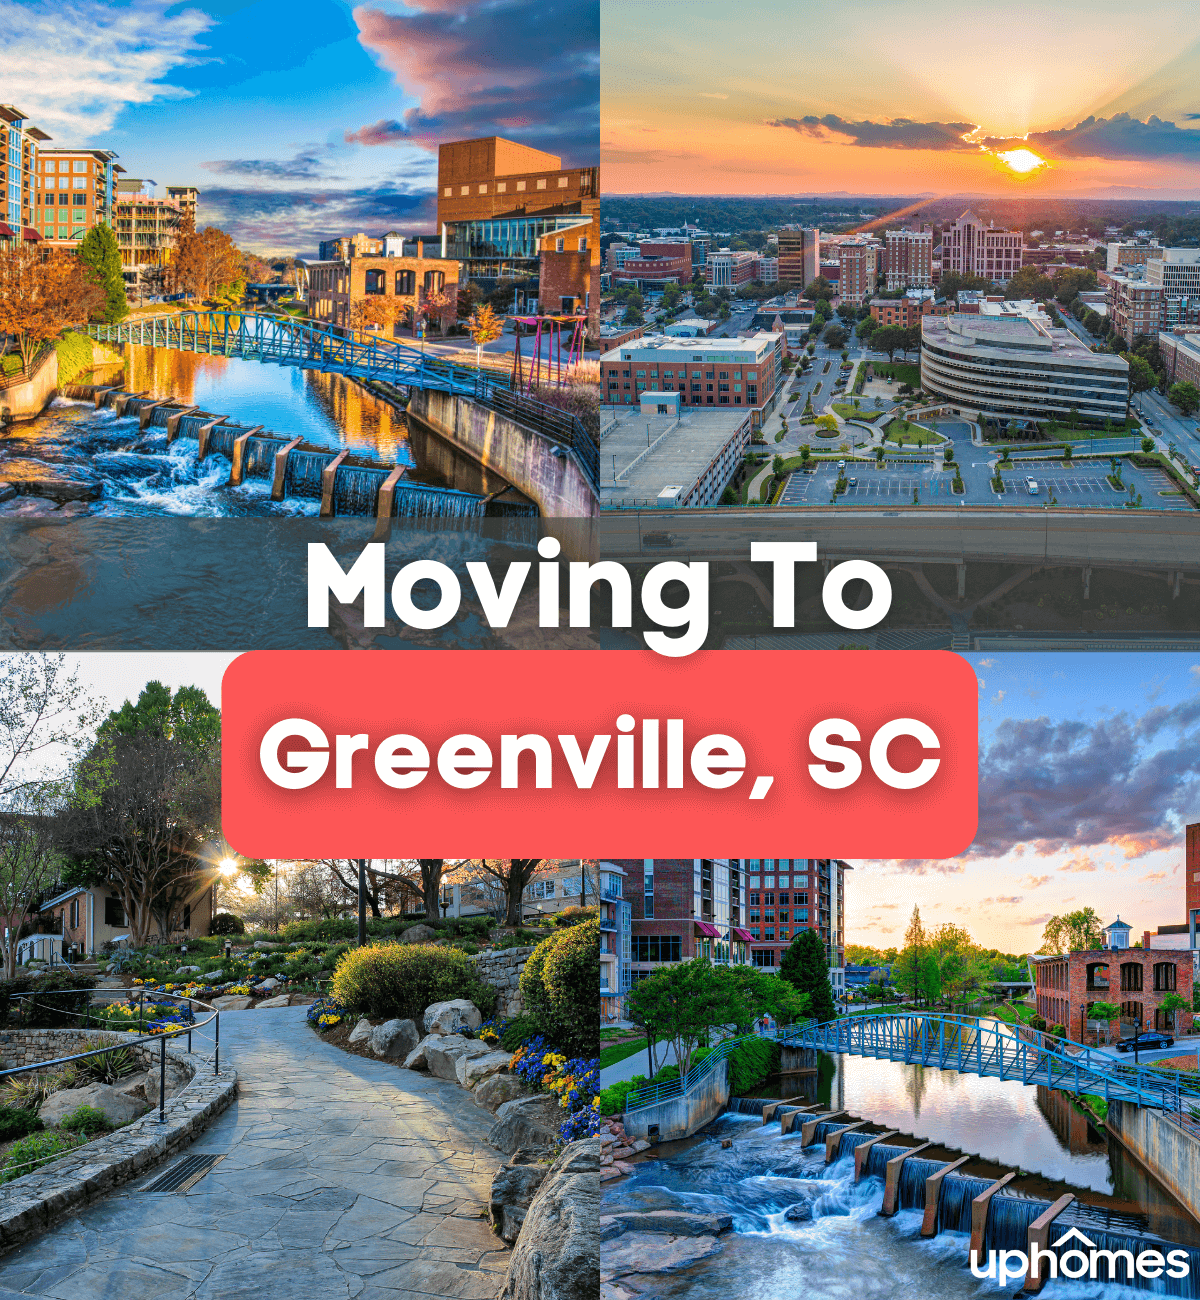 Moving to Greenville, SC - What is it like living in Greenville, South Carolina?